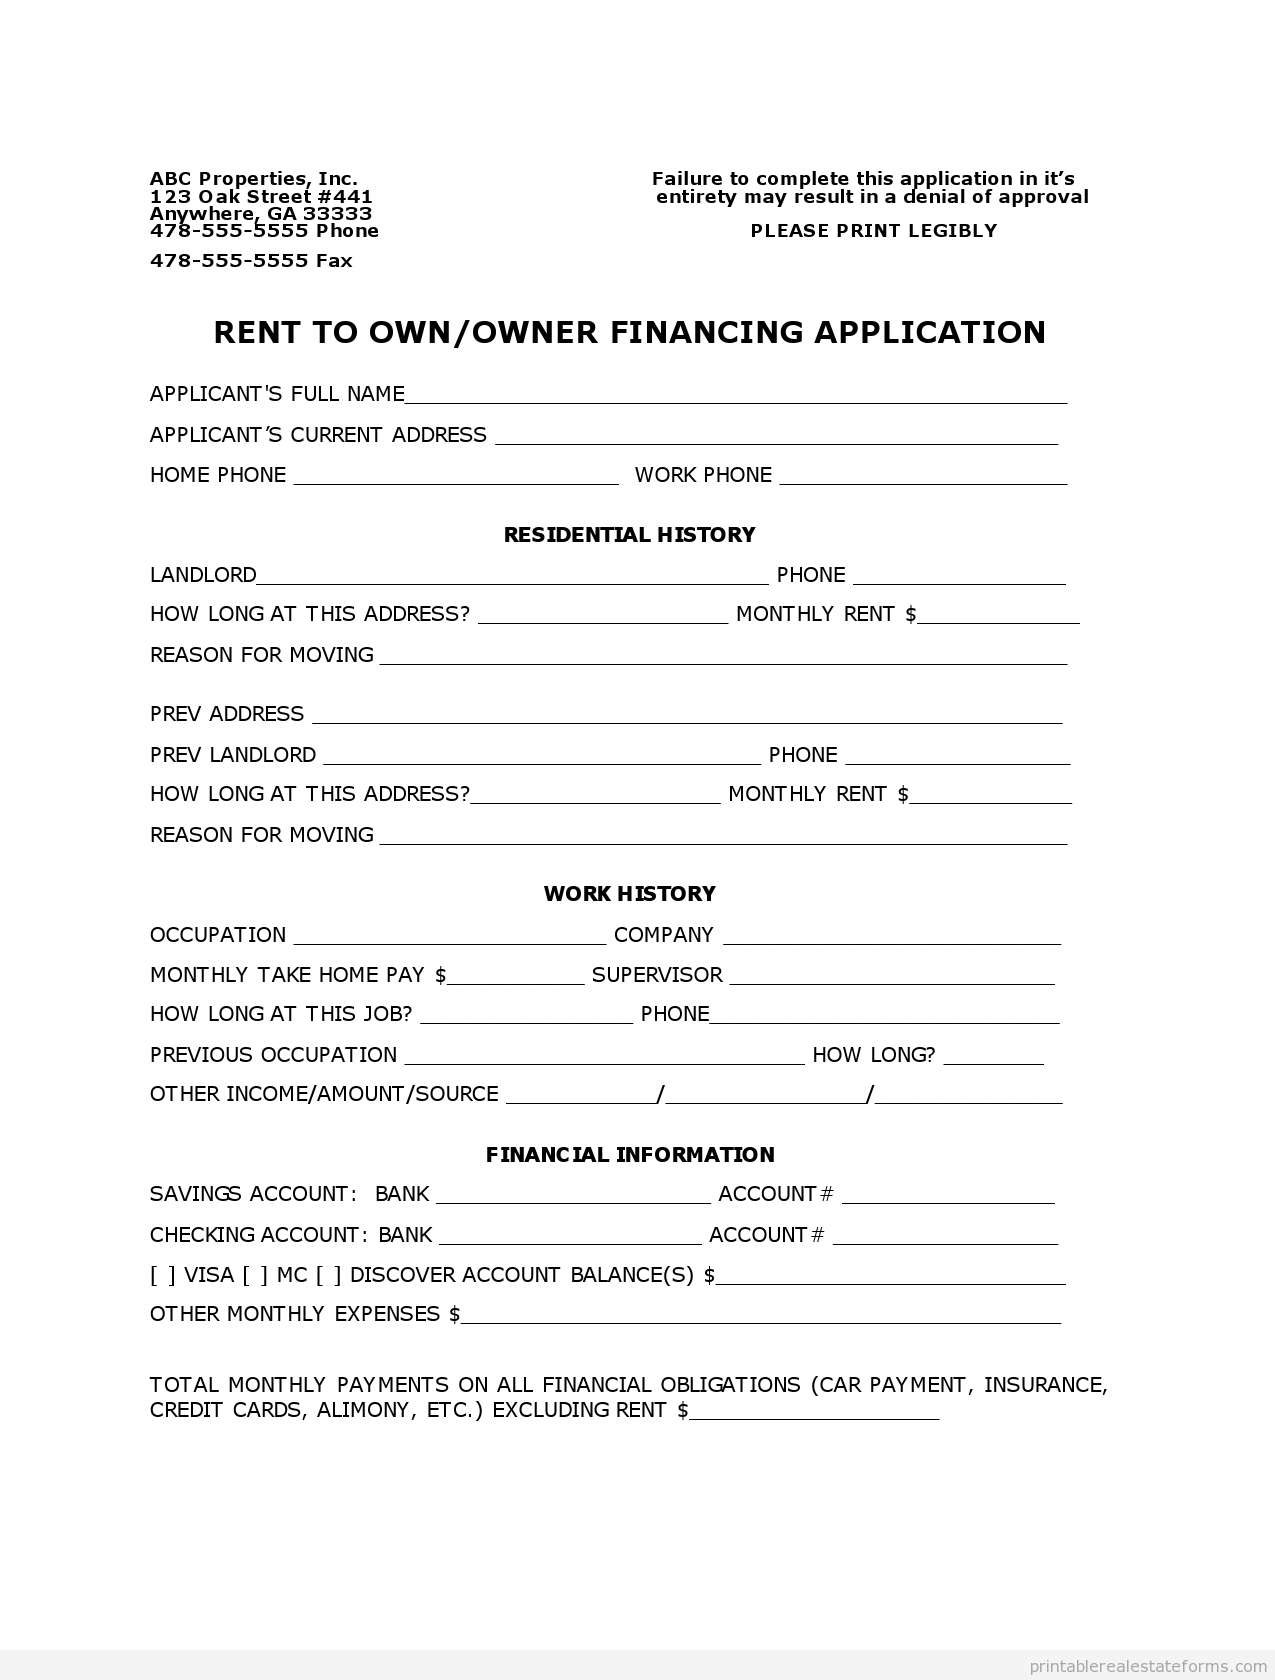 Owner Financing Agreement Printable Free (BLANK FORM)